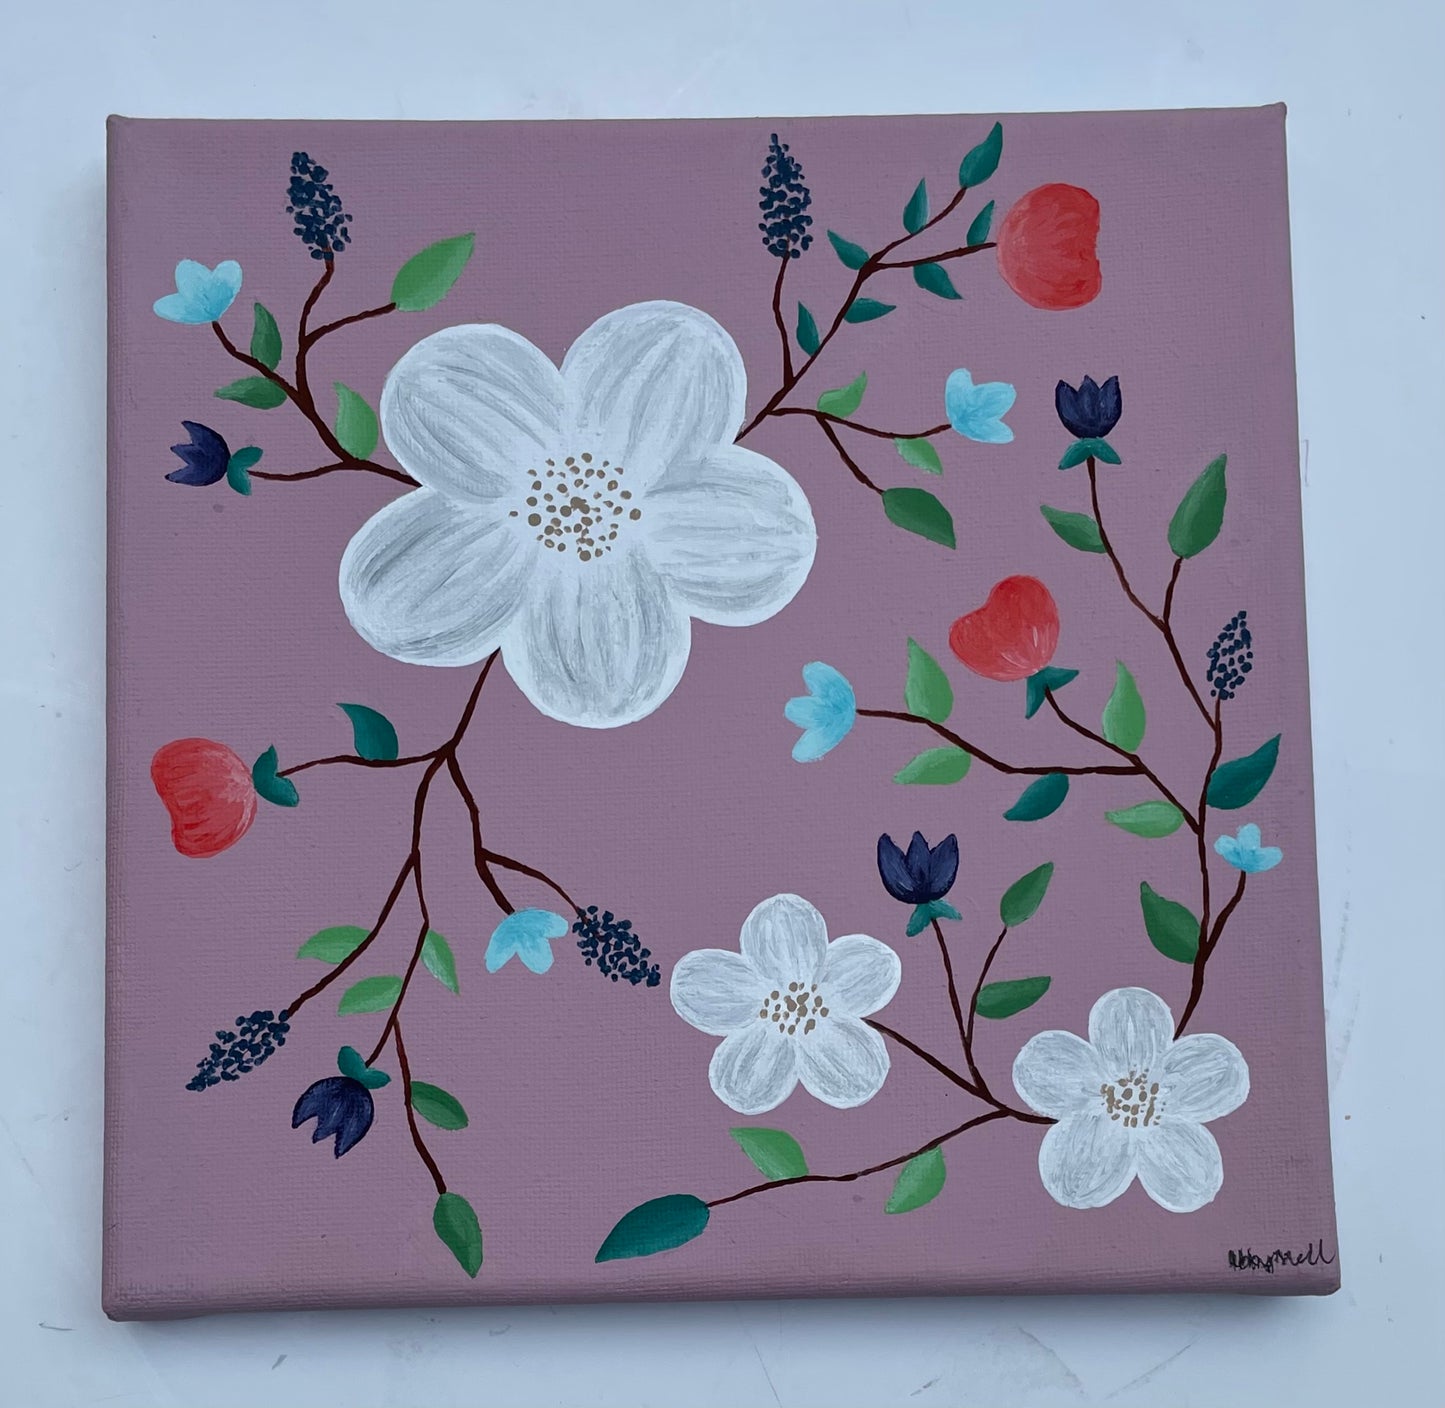 Floral Painting on Canvas 8" x 8"